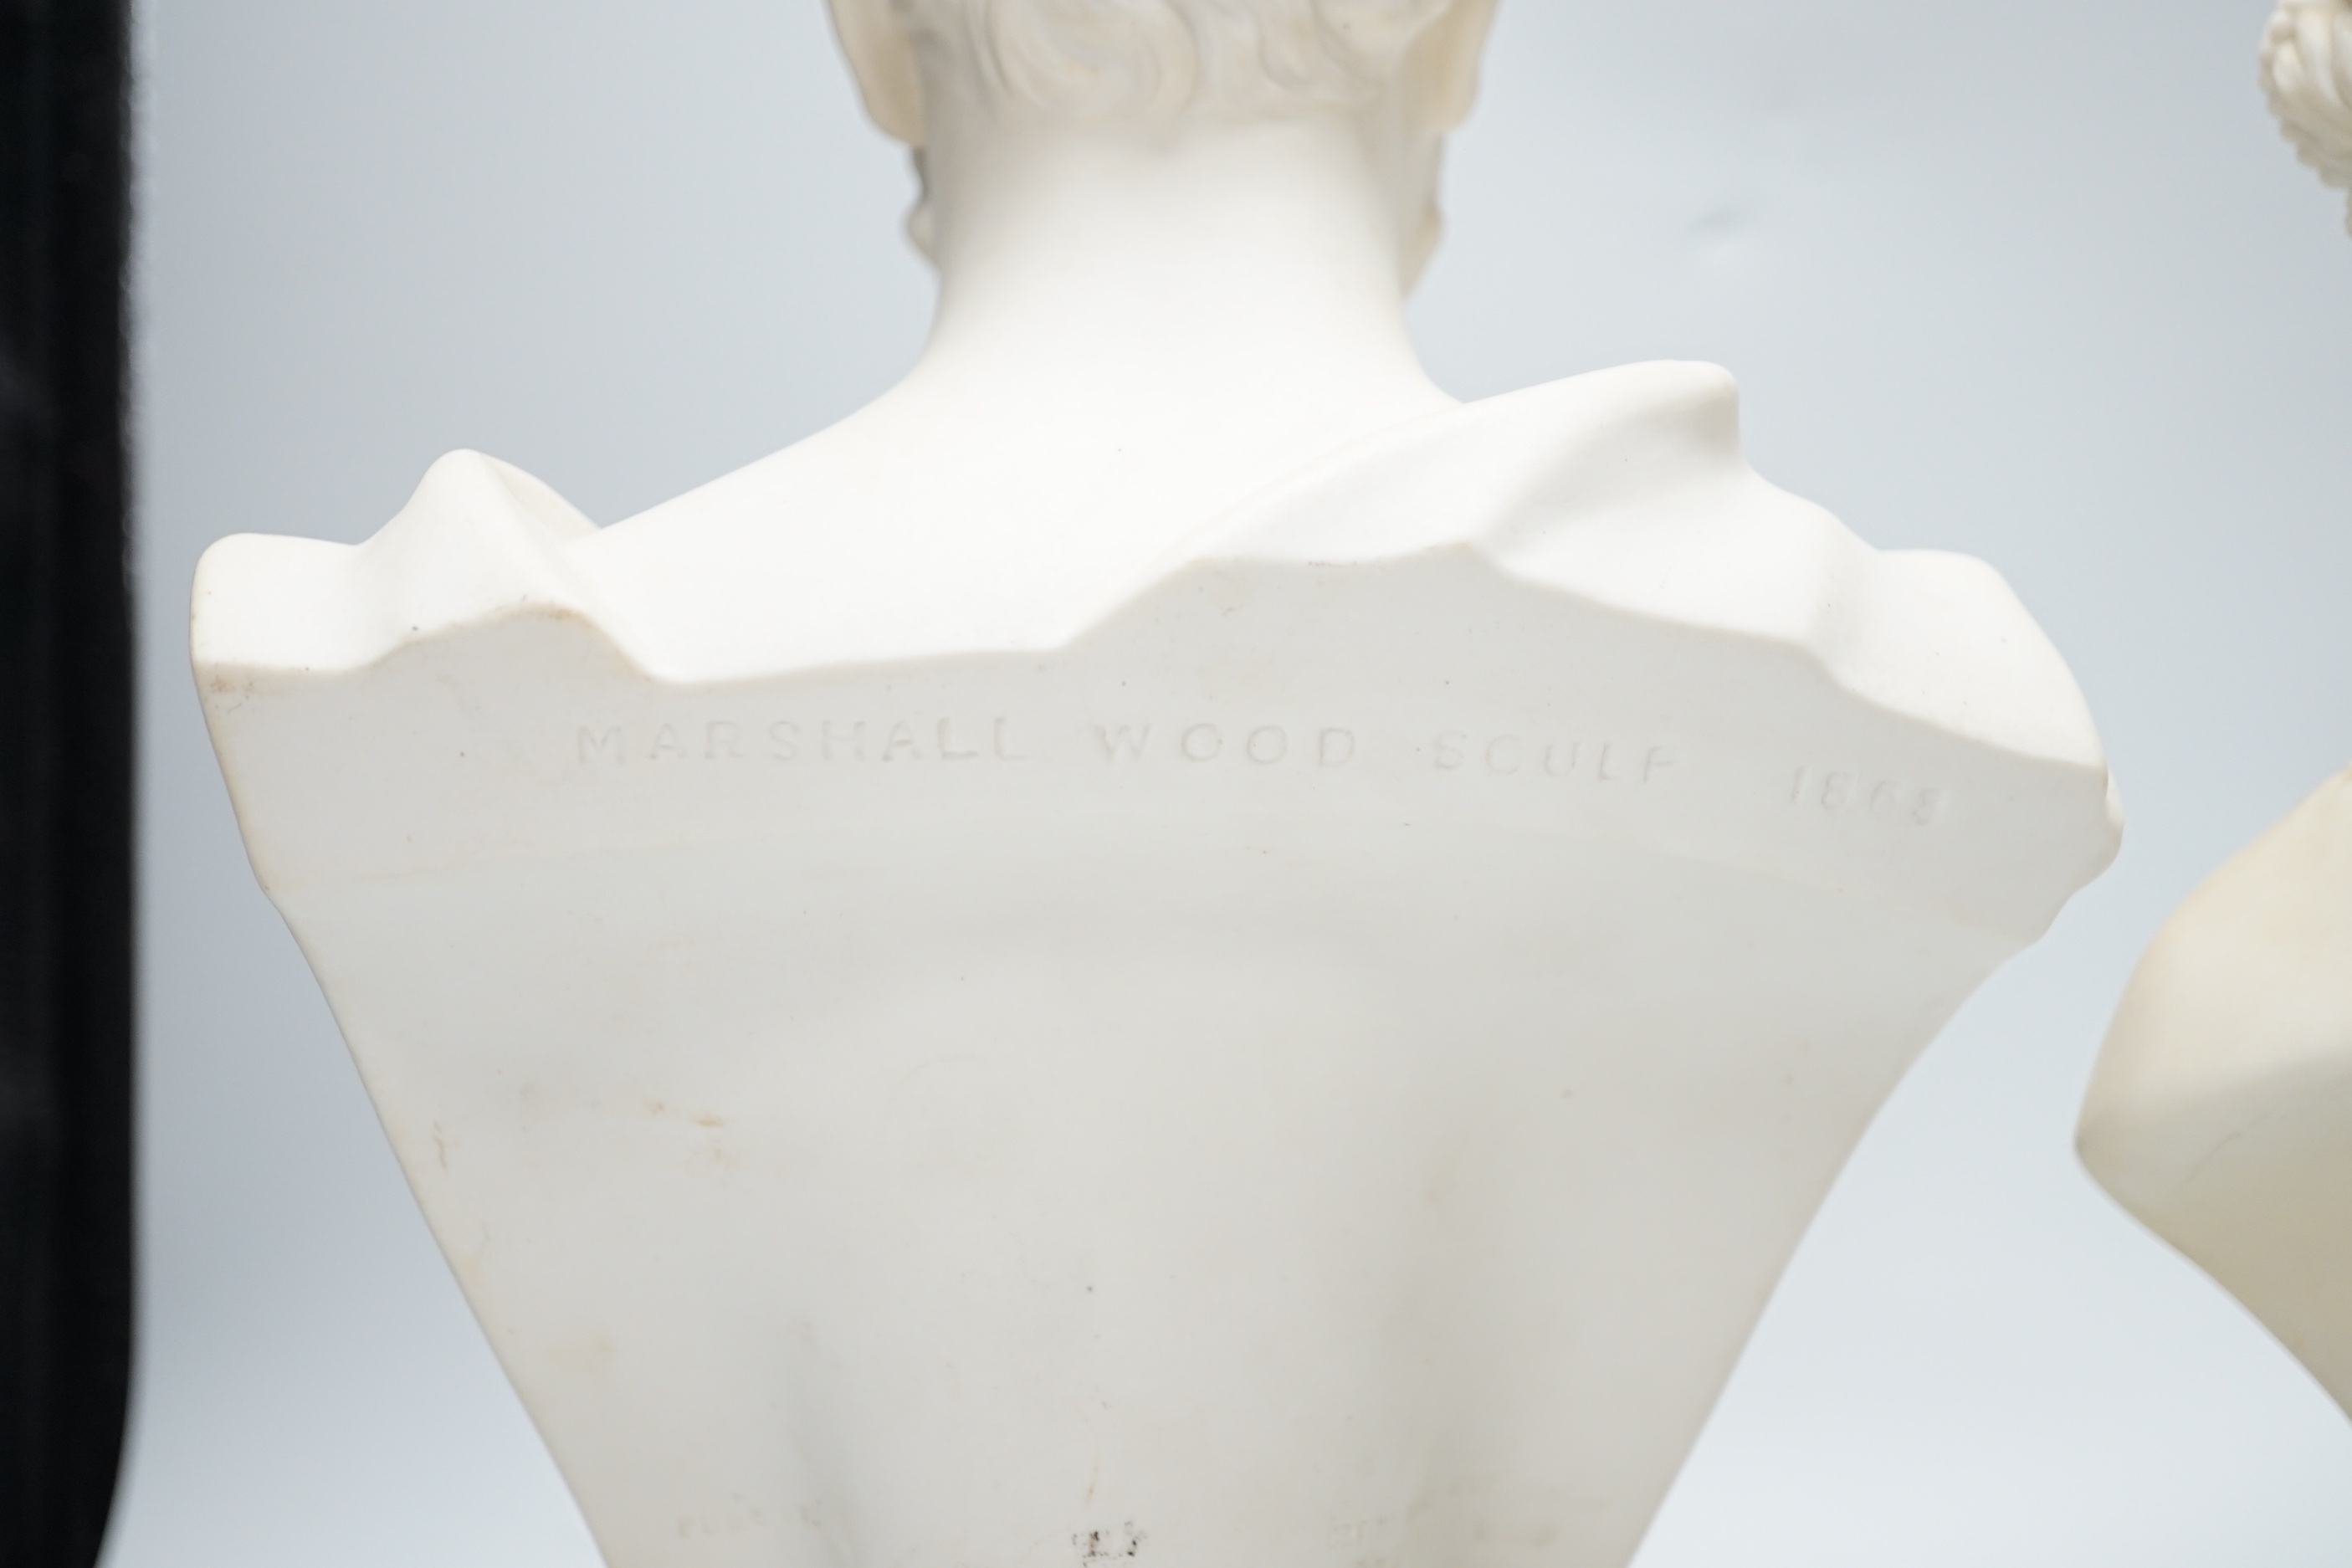 Two Copeland Parian busts, Prince of Wales and Princess Alexandra, Crystal Palace Art Union 1863, one a copy of a Marshall Wood sculpture, highest 31.5cm